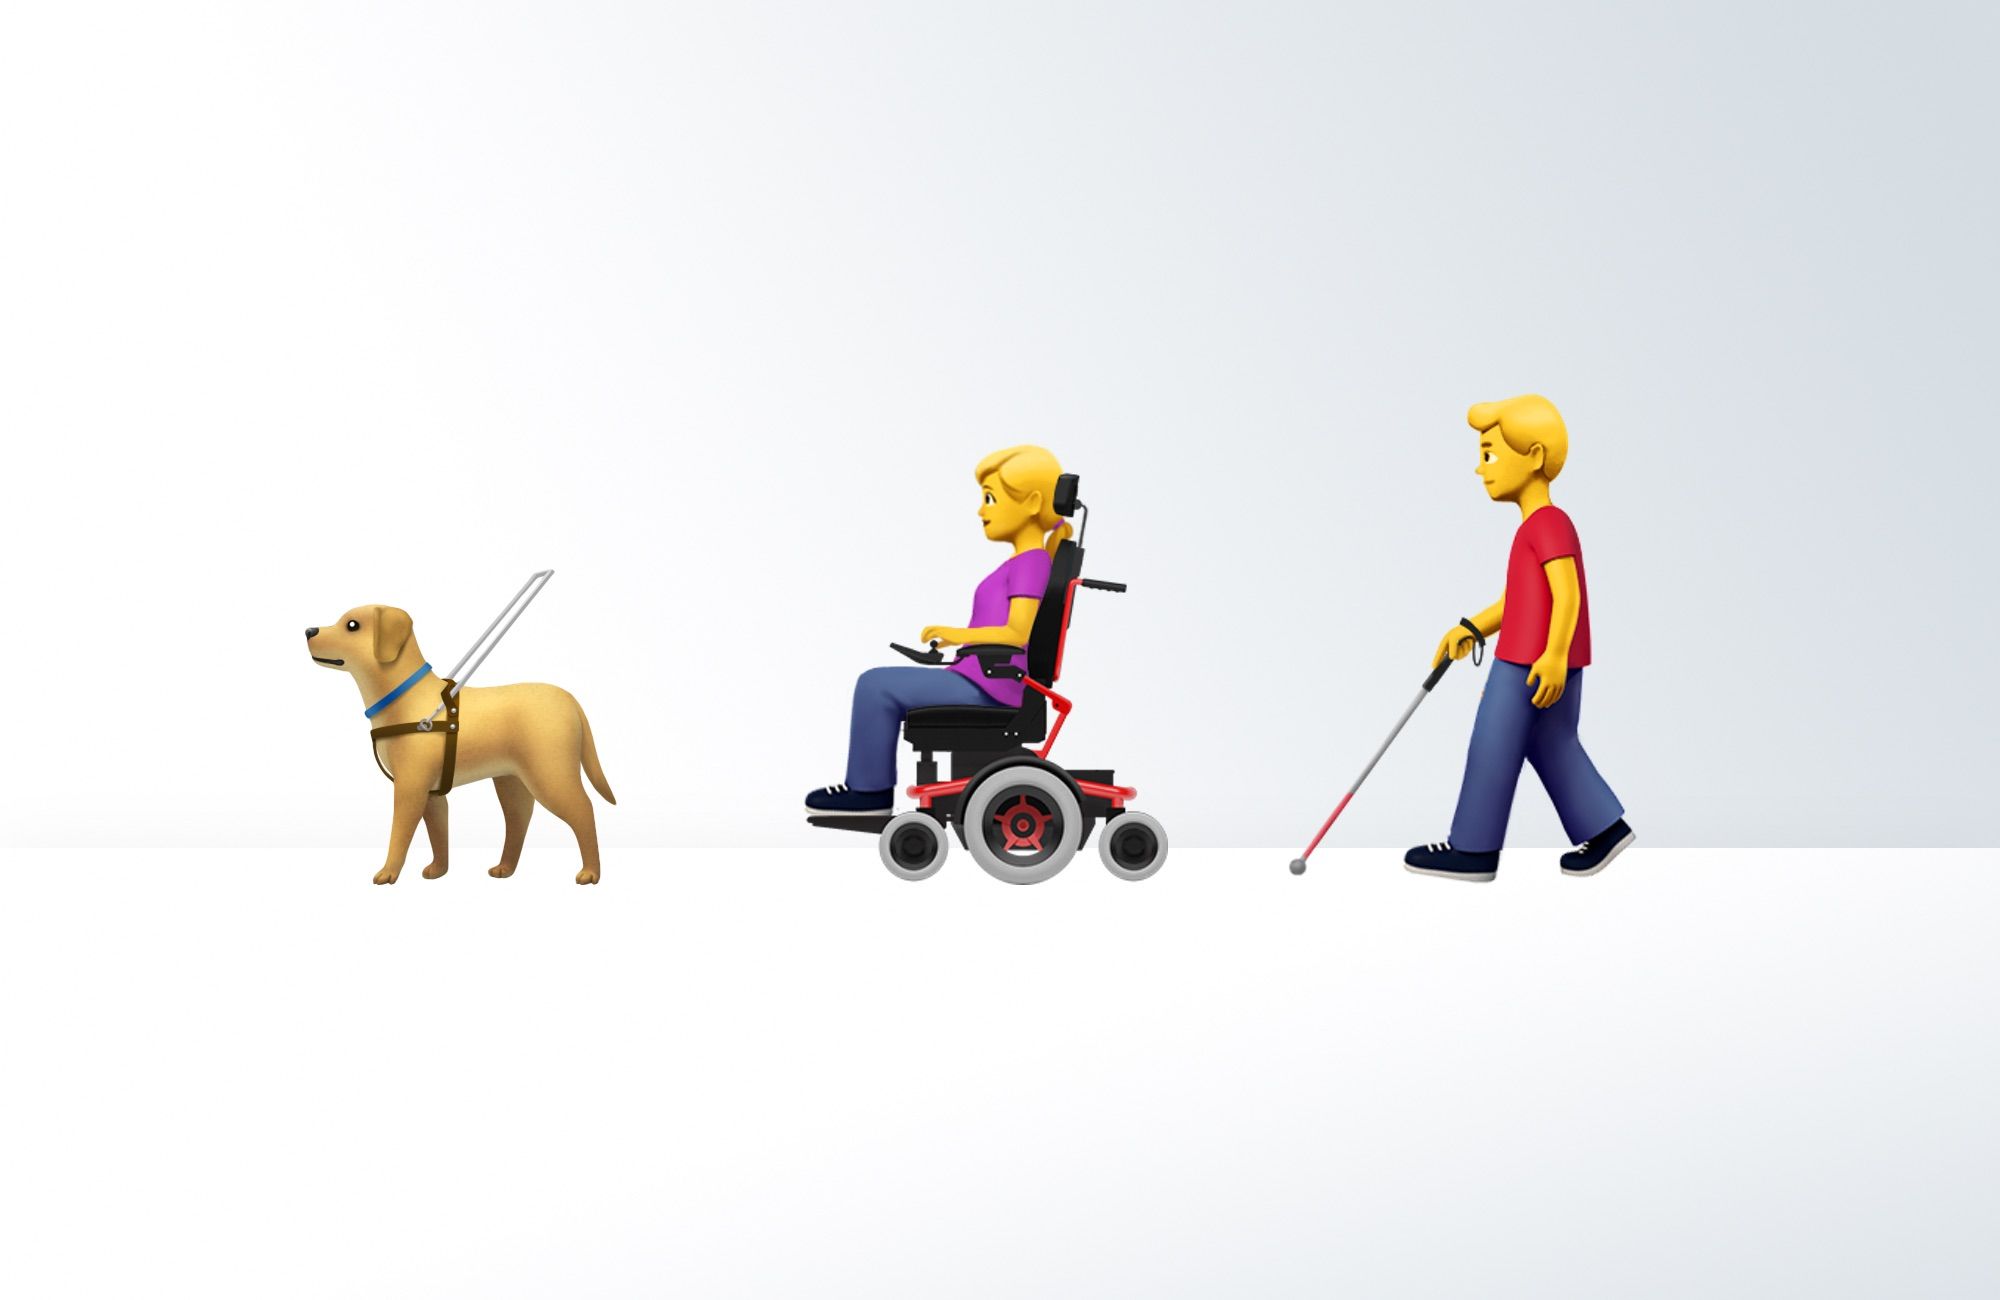 Apple Proposes New Accessibility Emojis